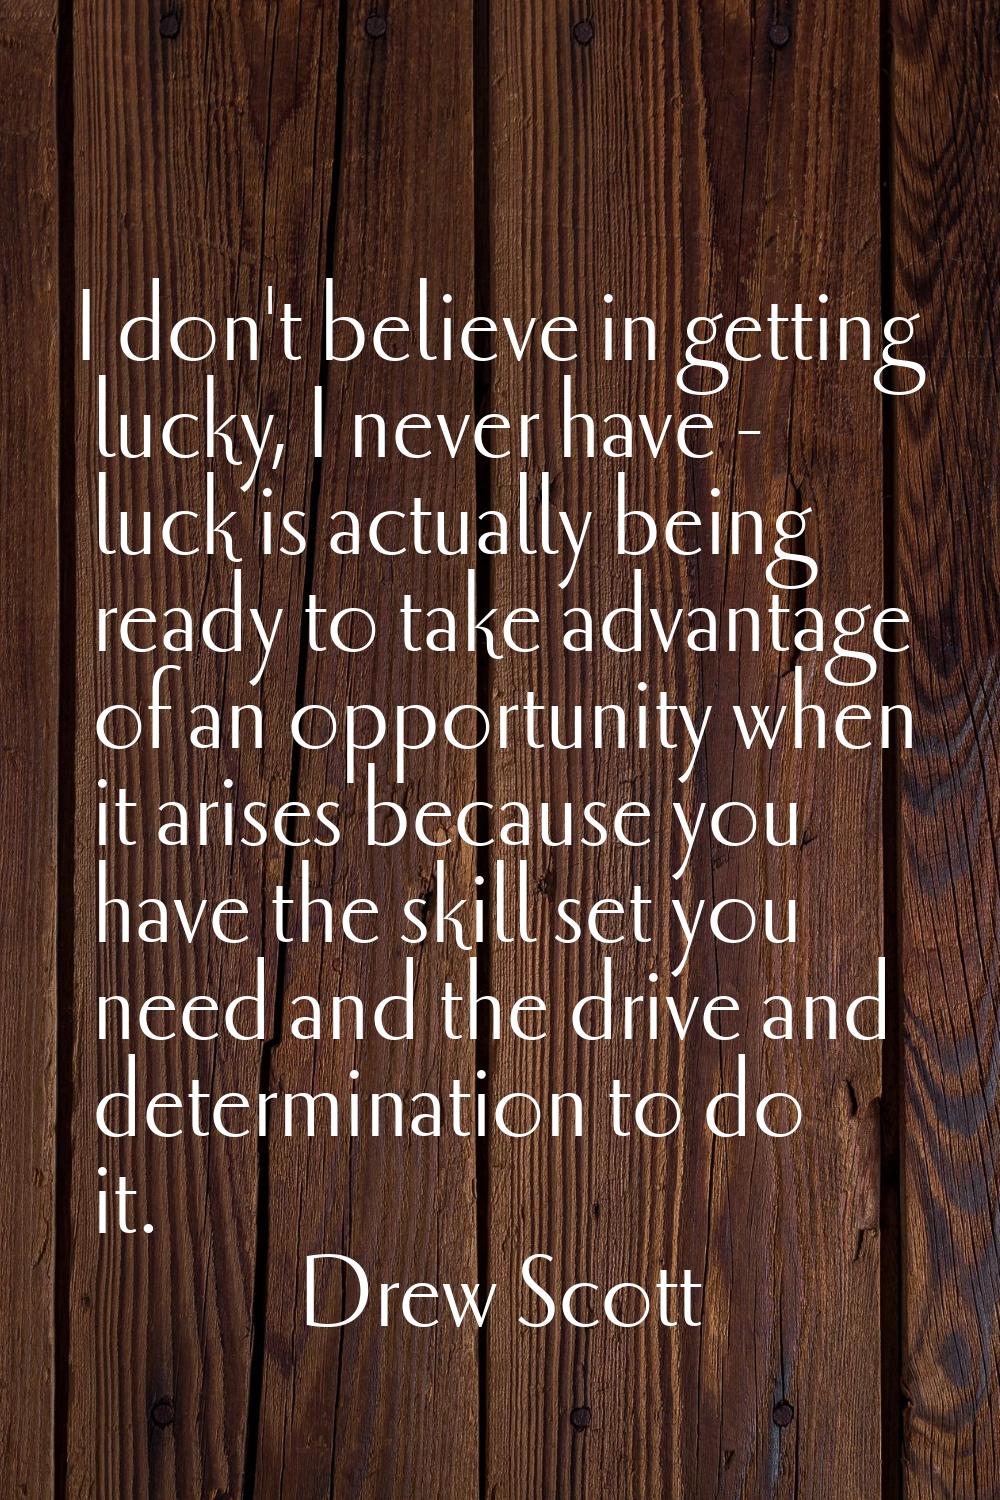 I don't believe in getting lucky, I never have - luck is actually being ready to take advantage of 